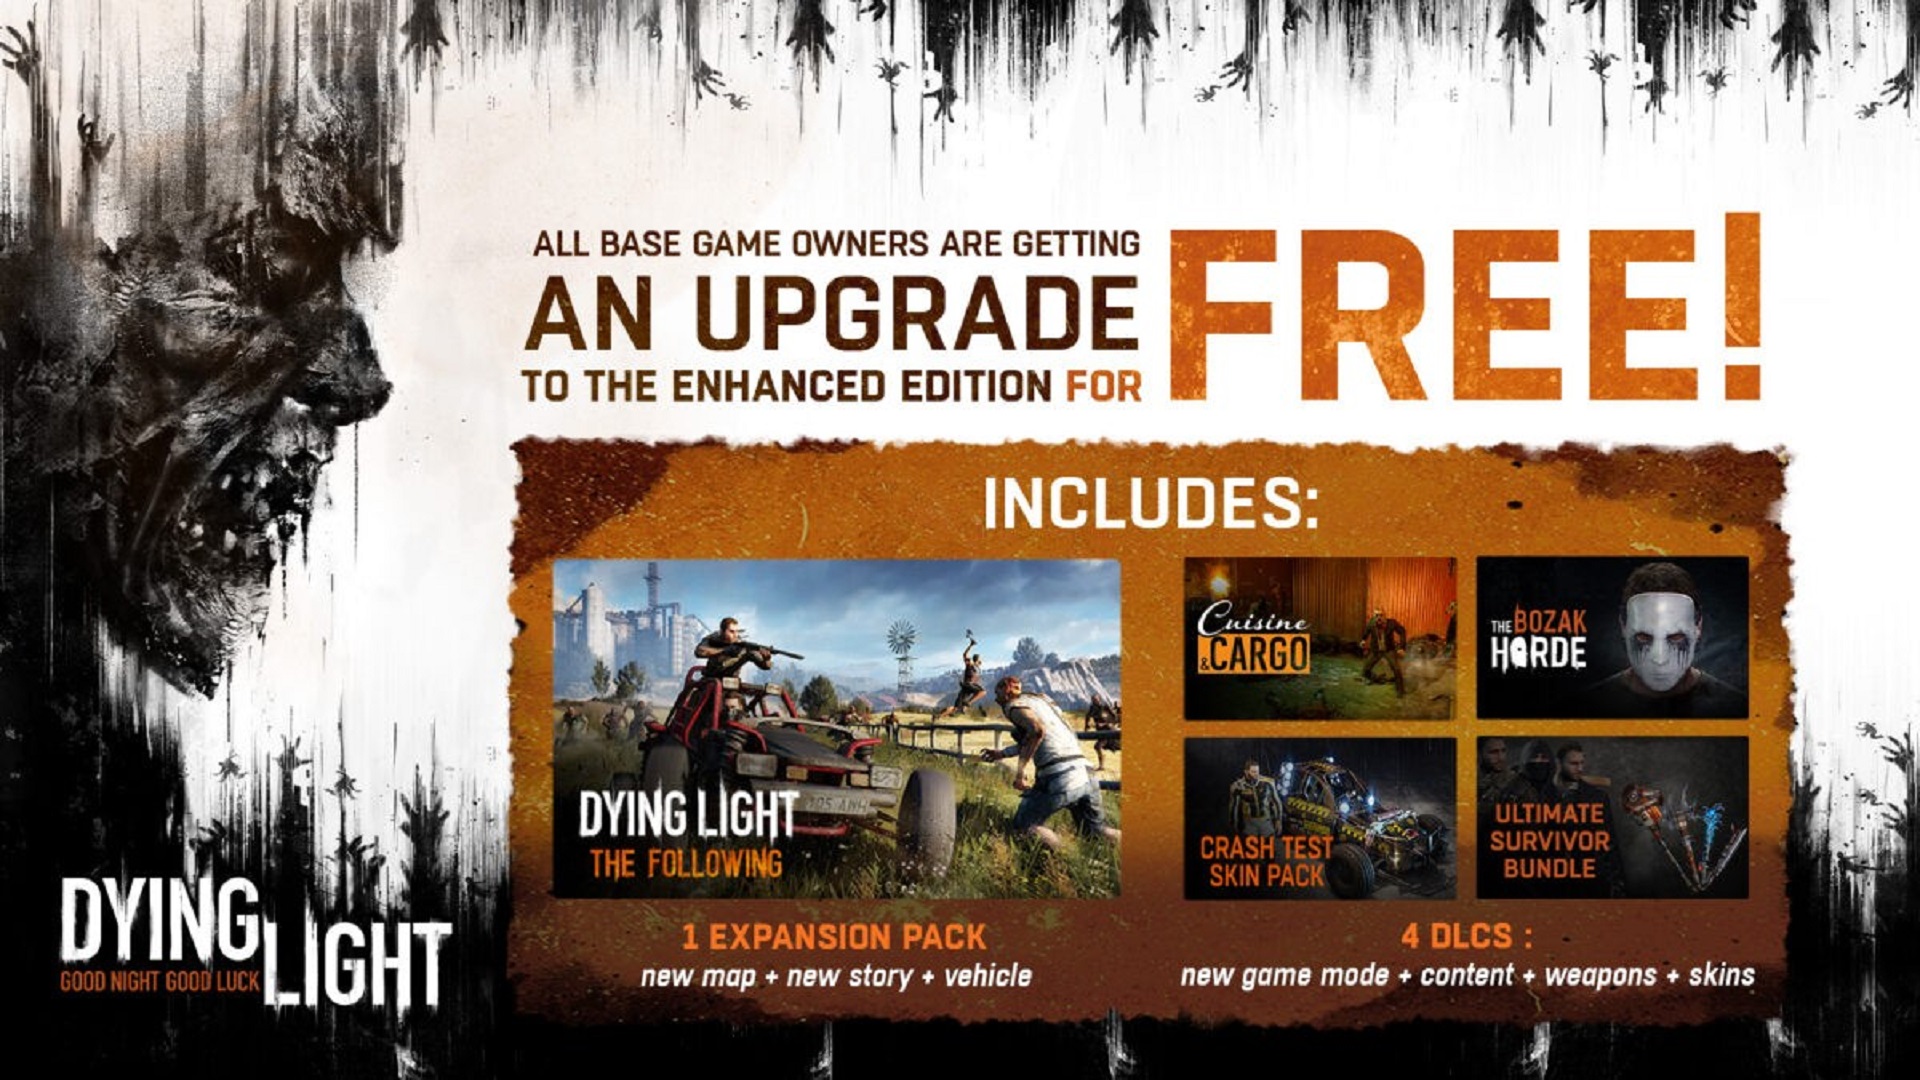 Promotional image for Dying Light's final update featuring an expansion pack and four DLCs